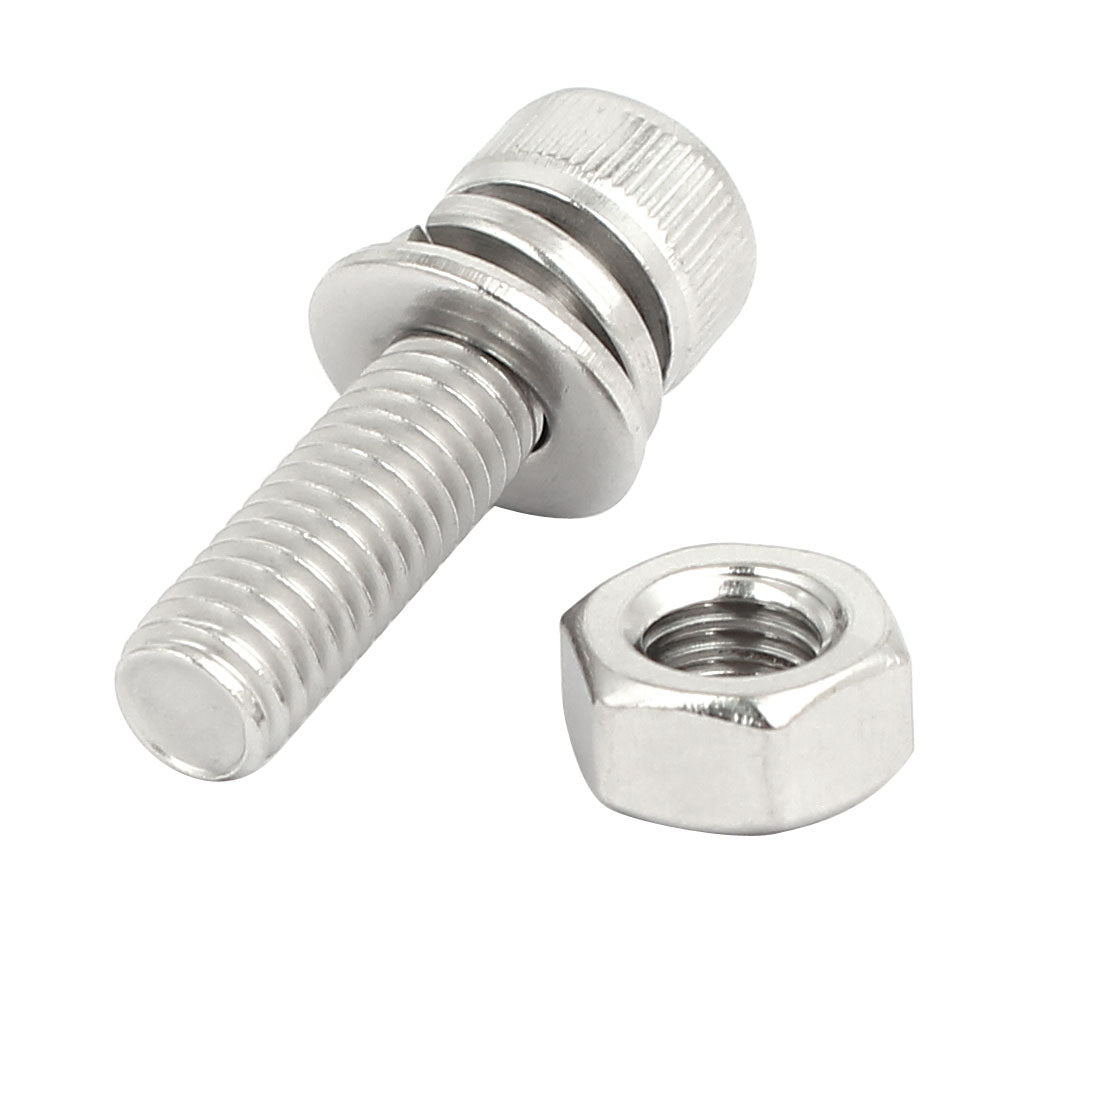 uxcell Uxcell M6x22mm 304 Stainless Steel Hex Socket Head Cap Bolt Screw Nut w Washer 8 Sets